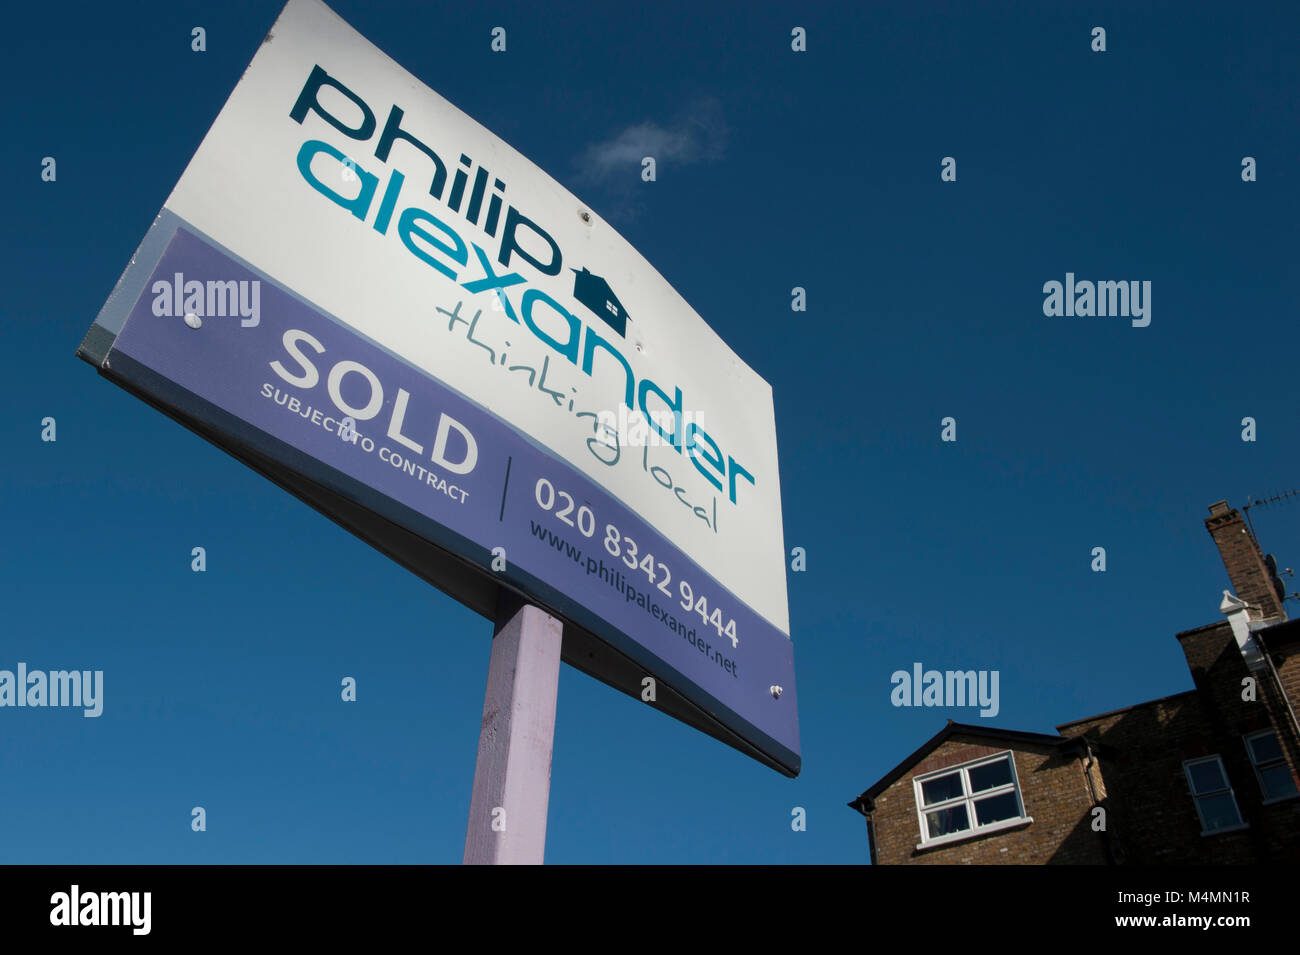 Philip Alexander sold estate agent sign in Muswell Hill in London, England Stock Photo